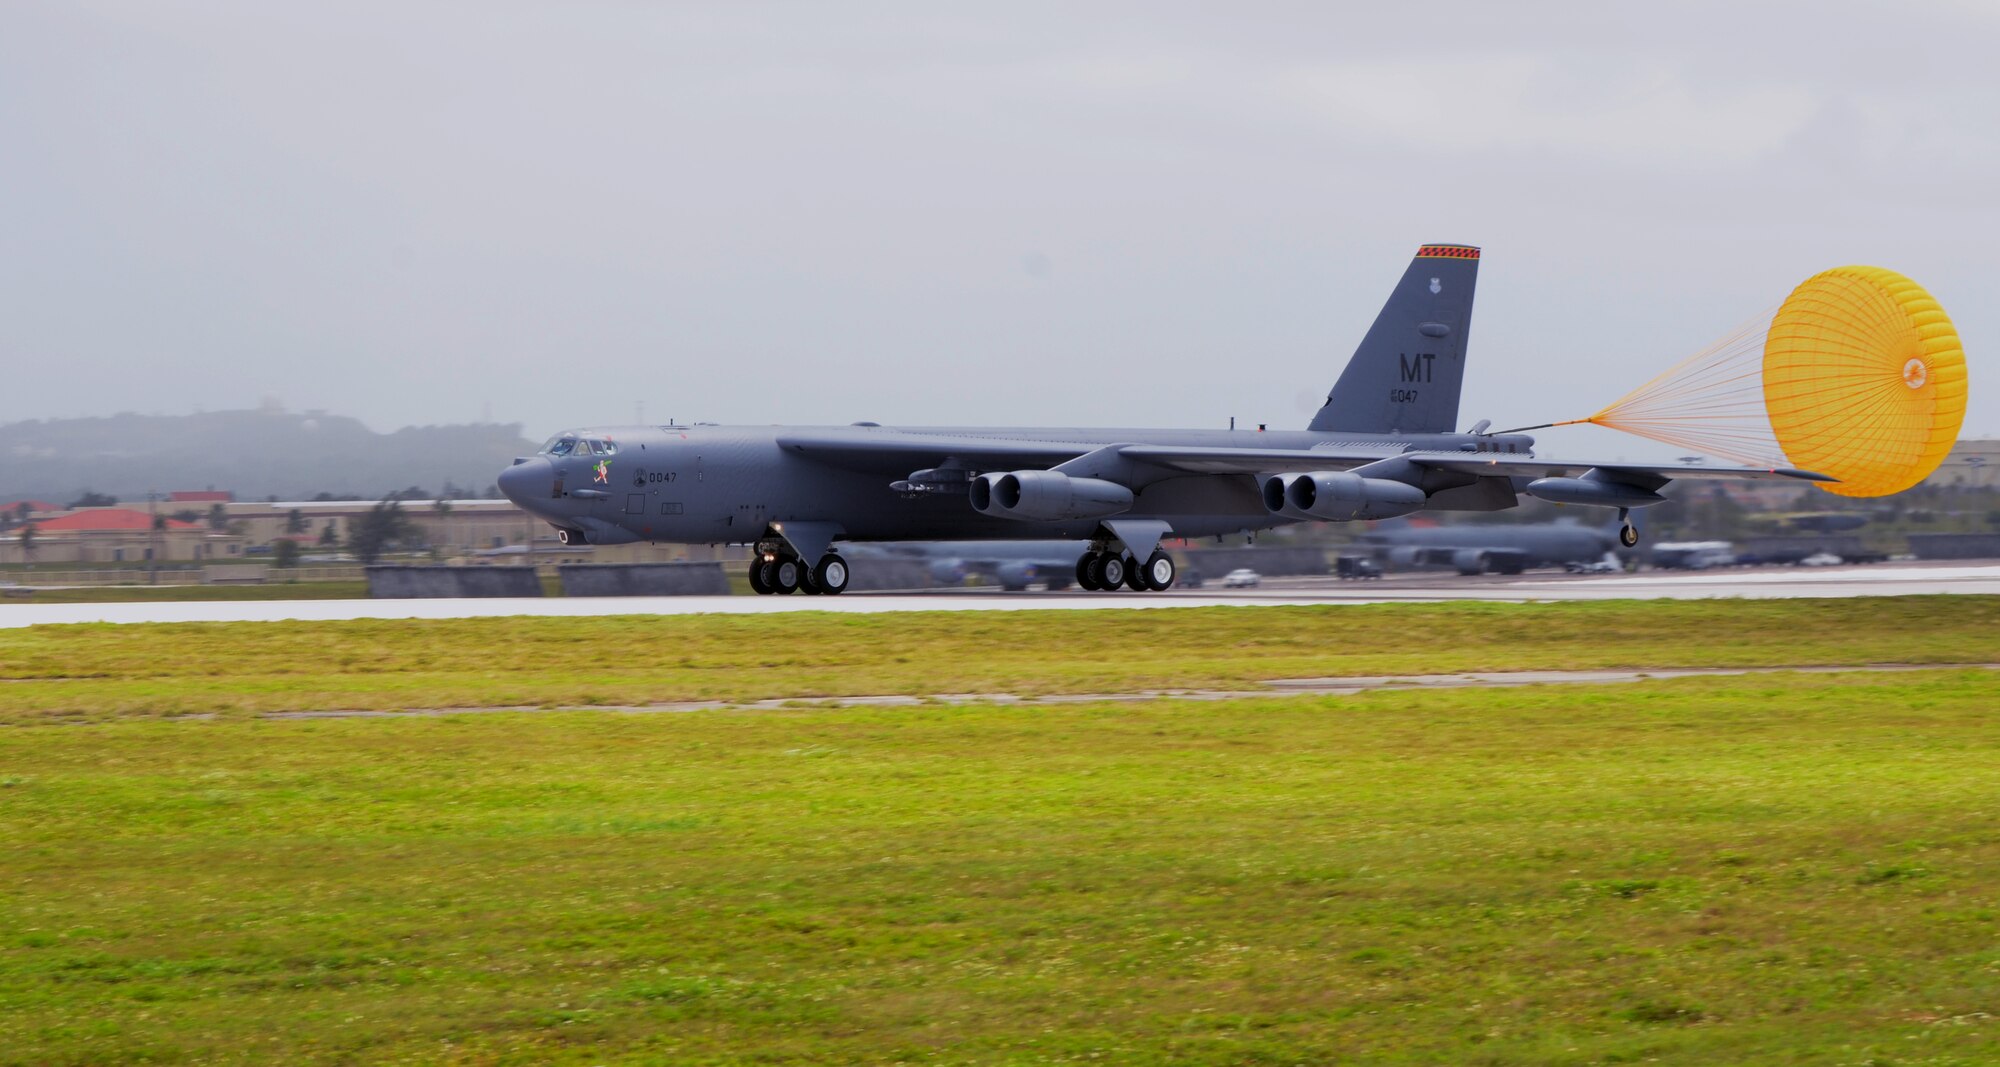 A B-52 Stratofortress from the 23rd Expeditionary Bomb Squadron, deployed from Minot Air Force Base, N.D., lands at Andersen AFB, Guam, April 2, 2013. The 23rd EBS arrived March 31 in relief of the 96th EBS from Barksdale AFB, La. and is deployed to Andersen to support U.S. Pacific Command’s continuous bomber presence mission. (U.S. Air Force photo by Senior Airman Benjamin Wiseman/Released)